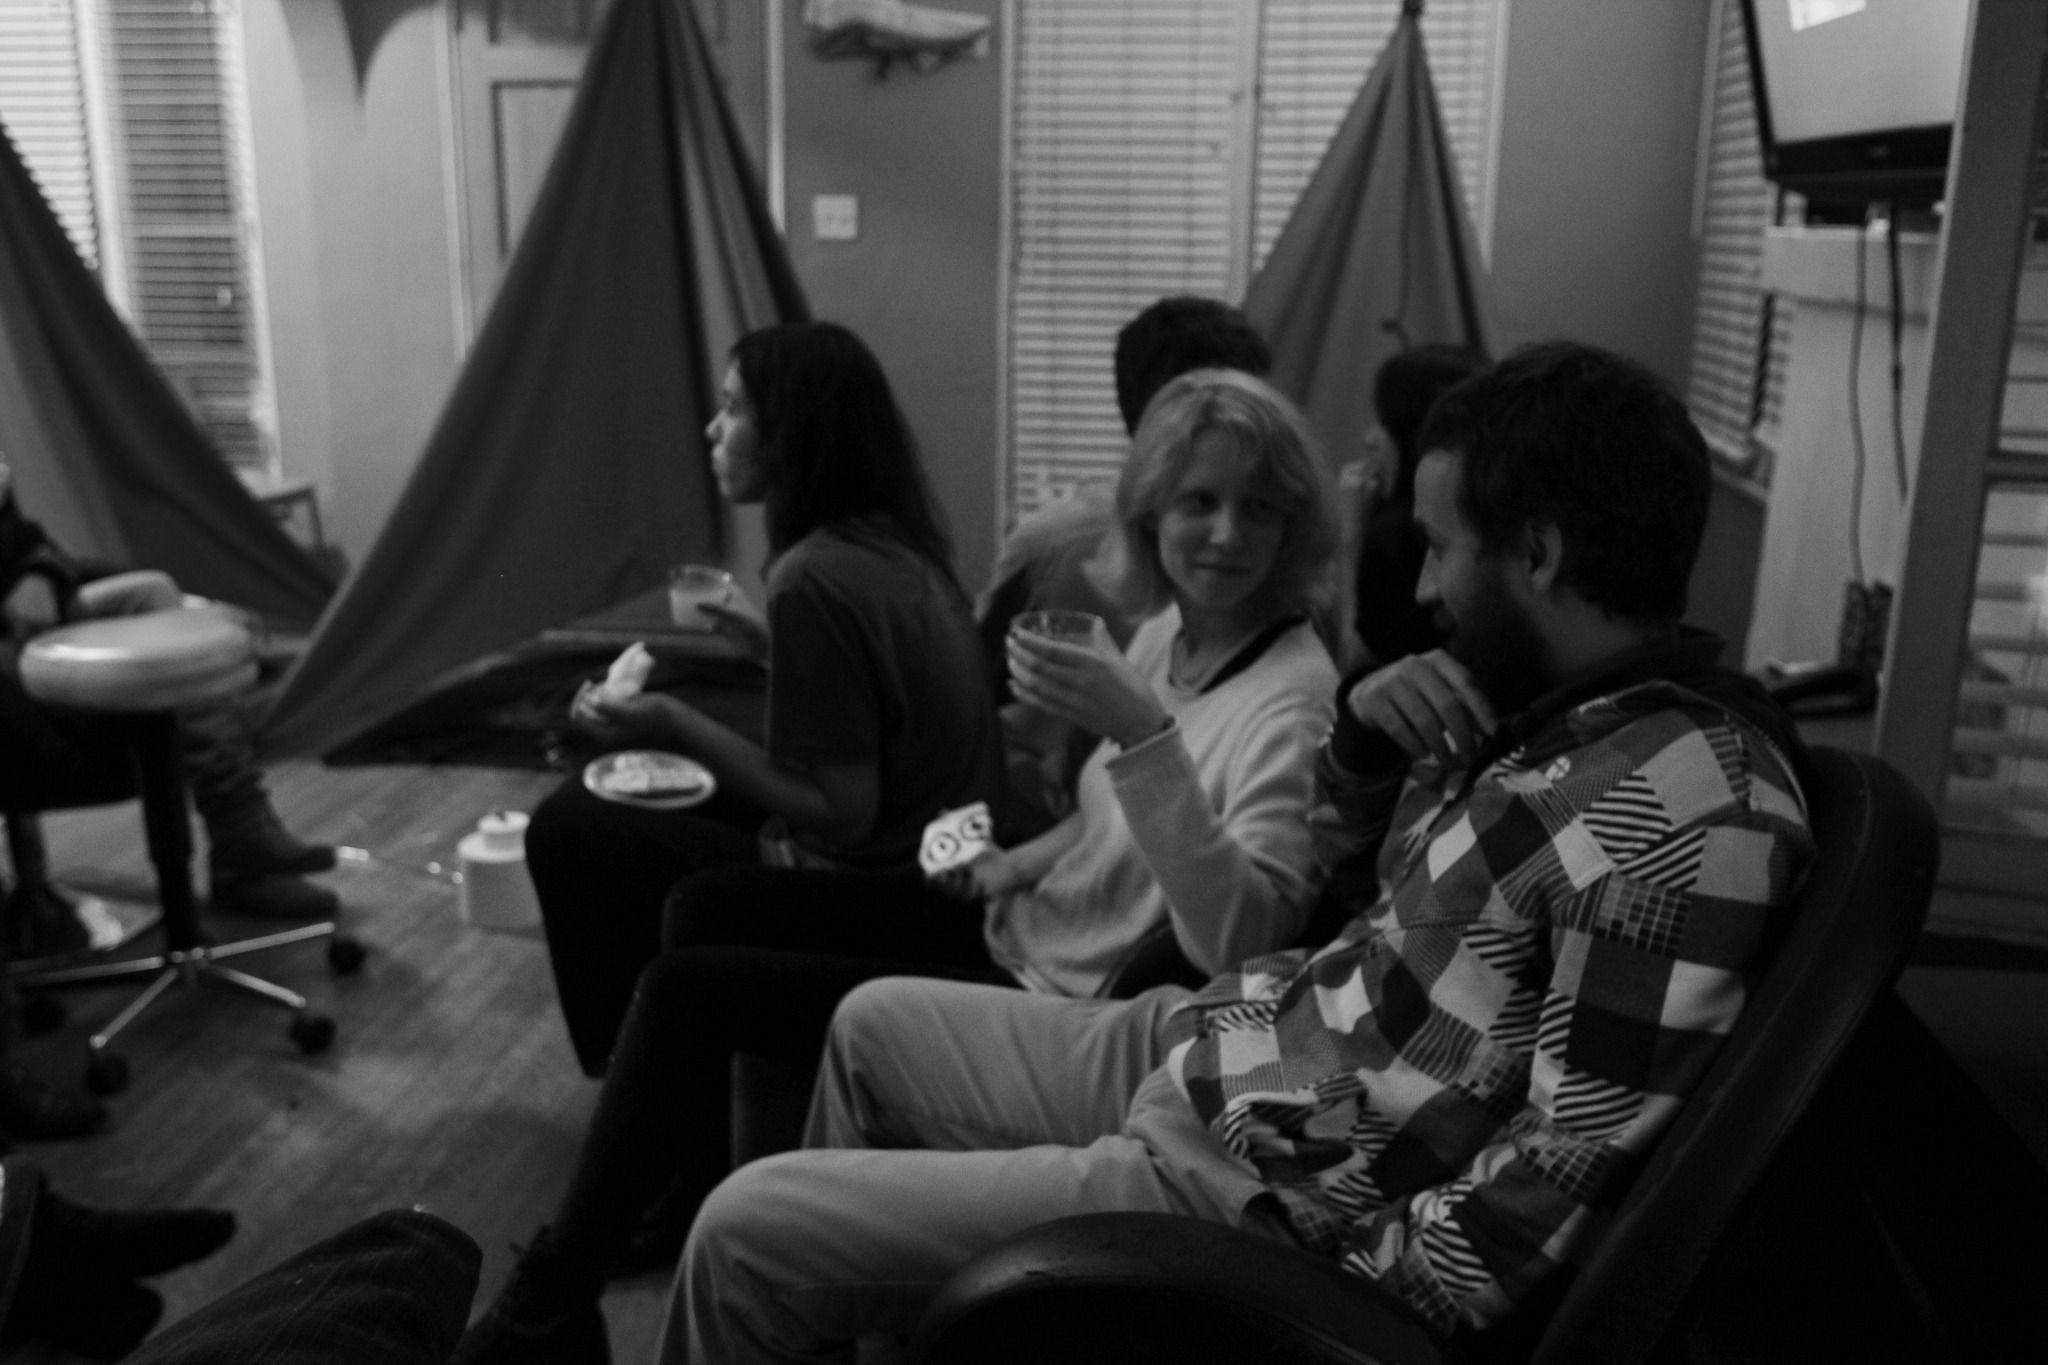 There is a dark, grayscale picture of various people sitting inside a small room. There are three tents in the background. There are three people sitting down and talking to each other. Some are holding cups. Everyone is smiling.